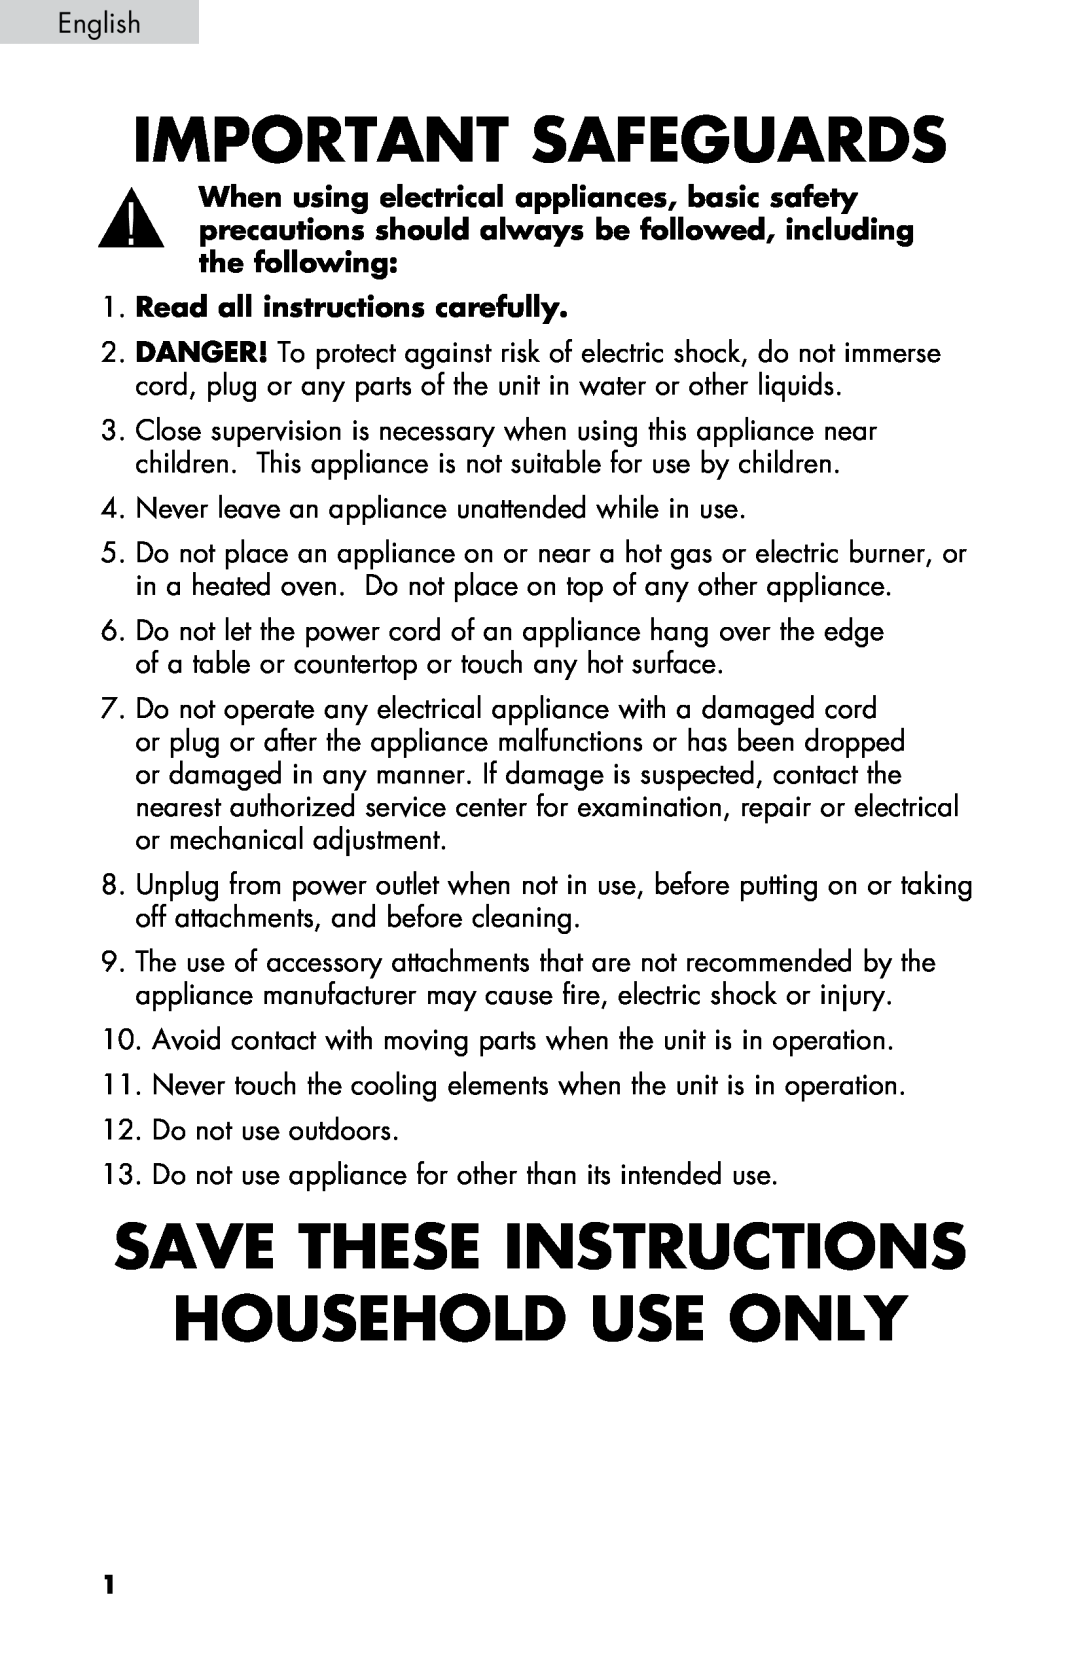 Haier HPIM25SS Important Safeguards, SAVE THESE INSTRUCTIONS Household Use Only, Read all instructions carefully 